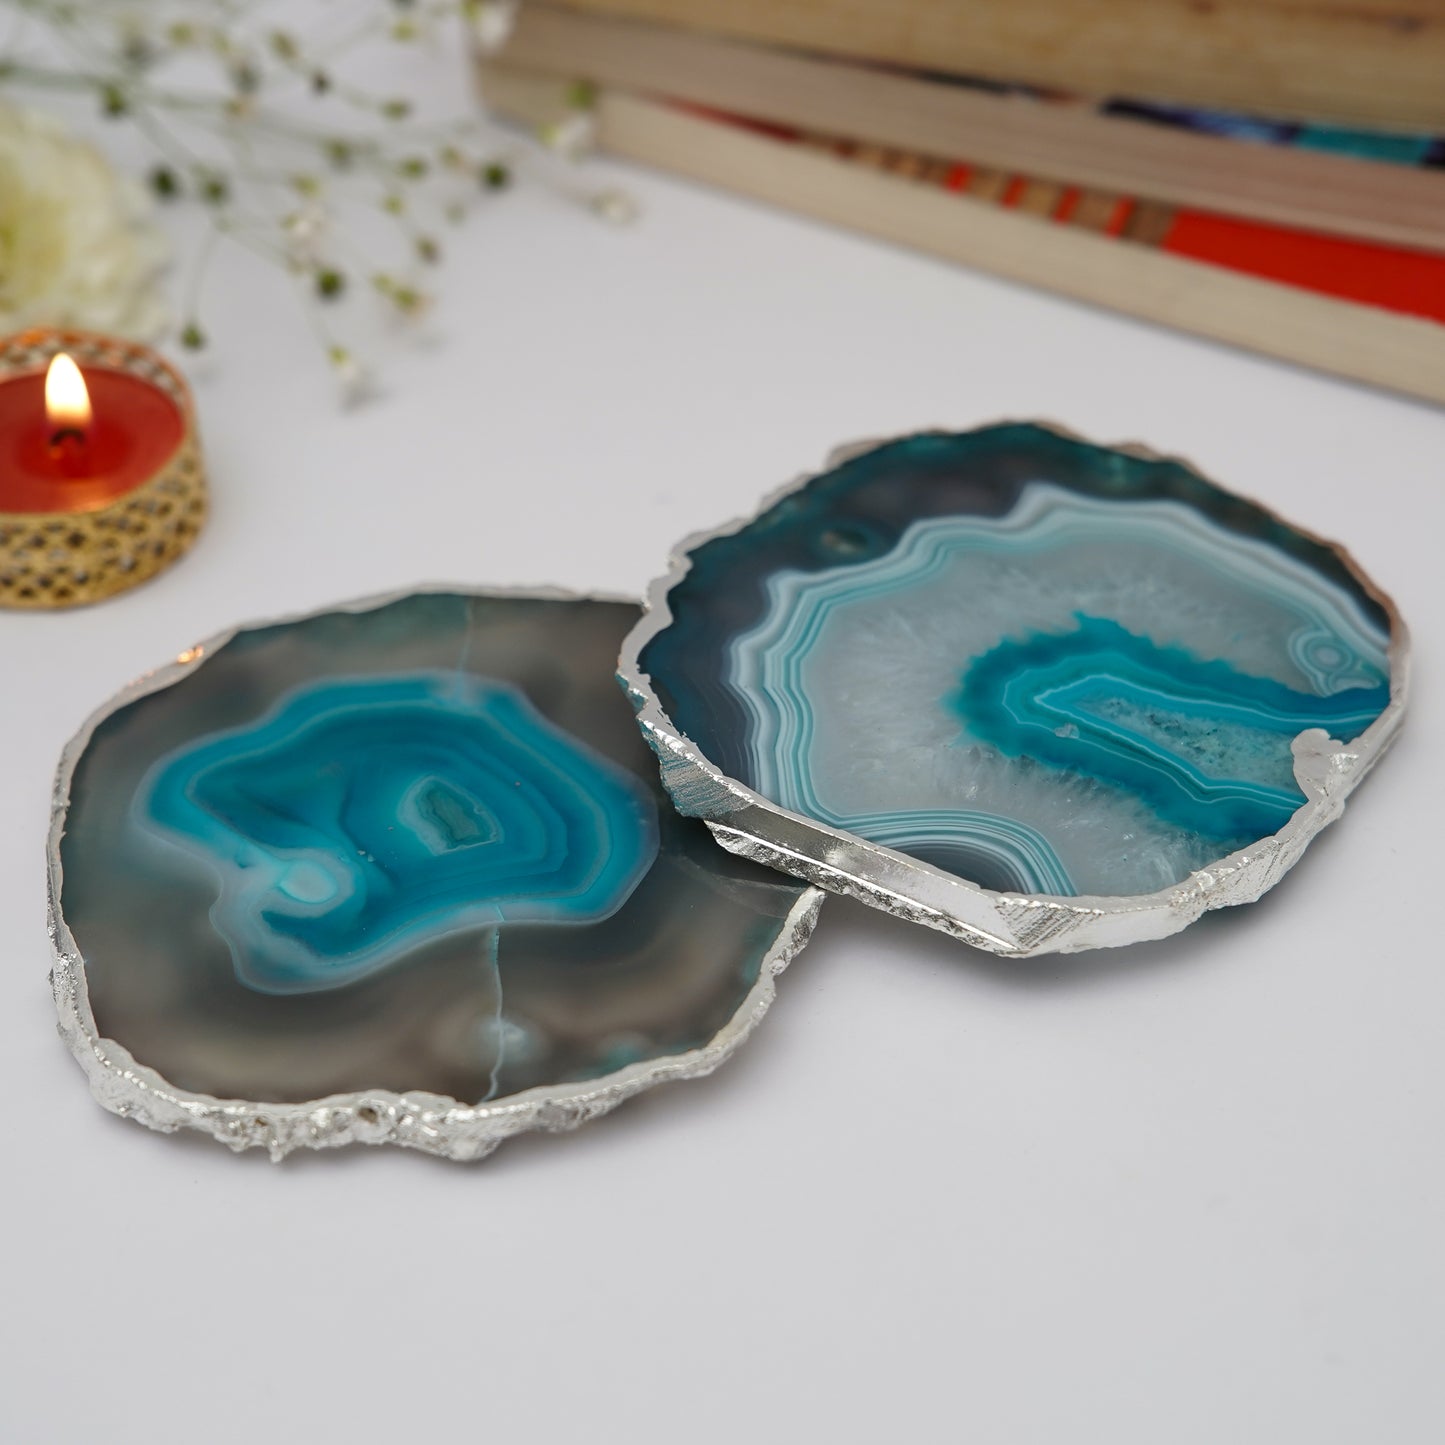 Brazilian Agate Stone Silver Plated Coaster Beautiful Coaster Fit for Tea Cups Coffee Mugs and Glasses Perfect Table Accessories Tableware Set of 2- Turquoise